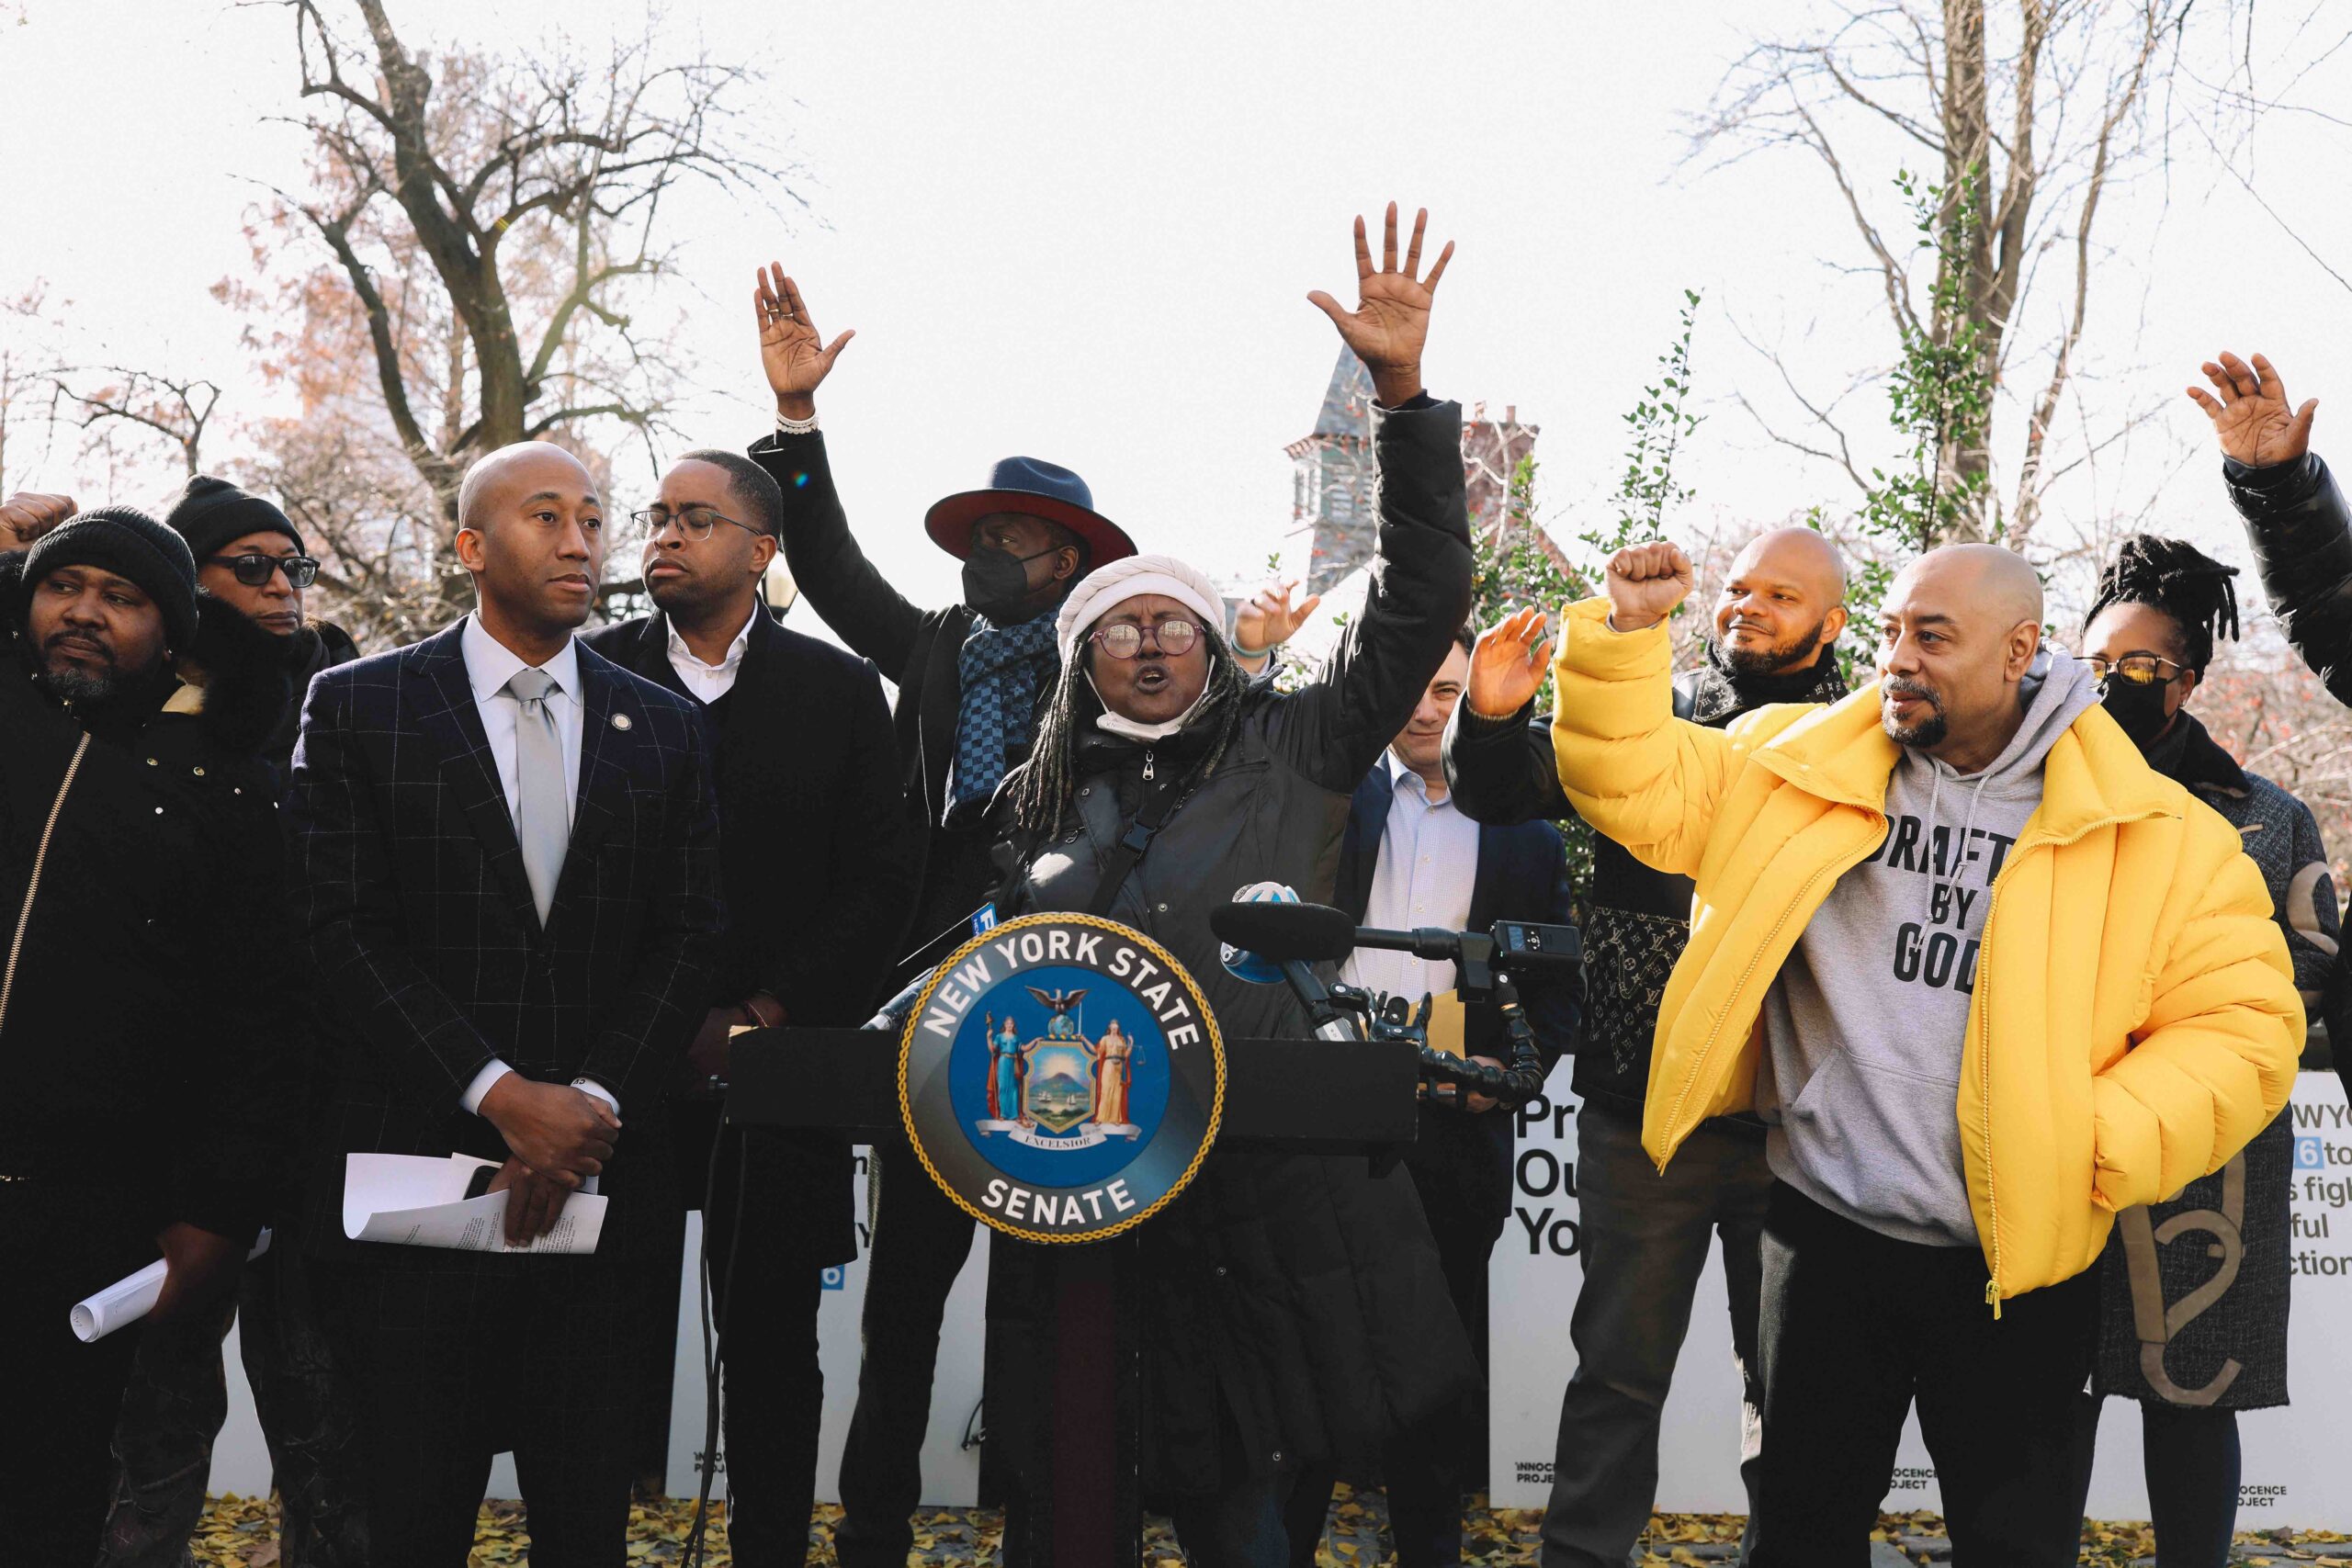 From left to right: Assemblyman Clyde Vanel, Sen. Myrie Zellnor, Sharonne Salaam, and Raymond Santana introducing a criminal justice package in New York on Dec. 14, 2021 in Central Park. (Image: Elijah Craig/Innocence Project 